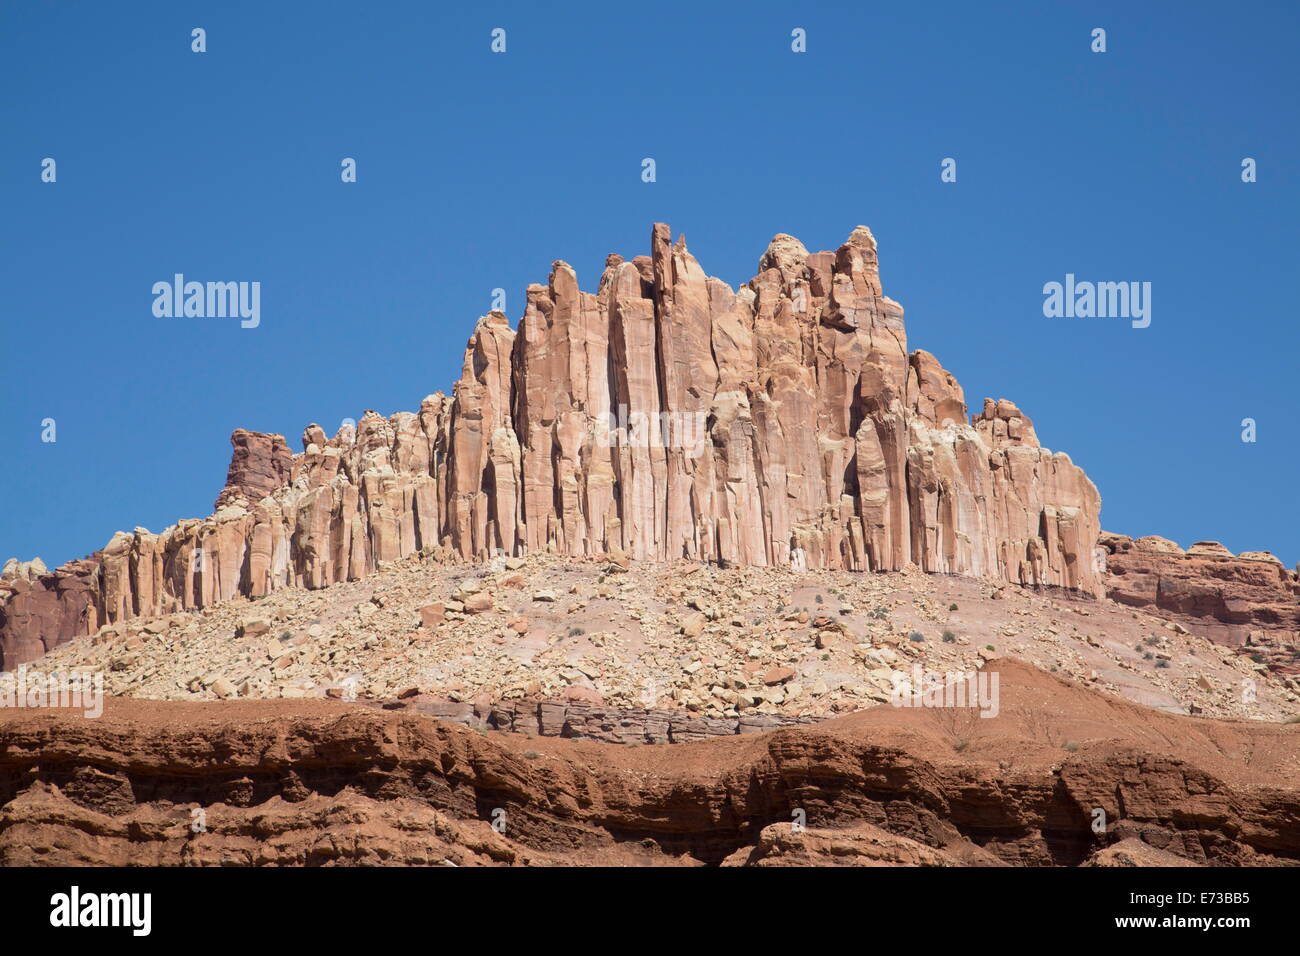 The Castle, a sandstone formation, Capitol Reef National Park, Utah, United States of America, North America Stock Photo